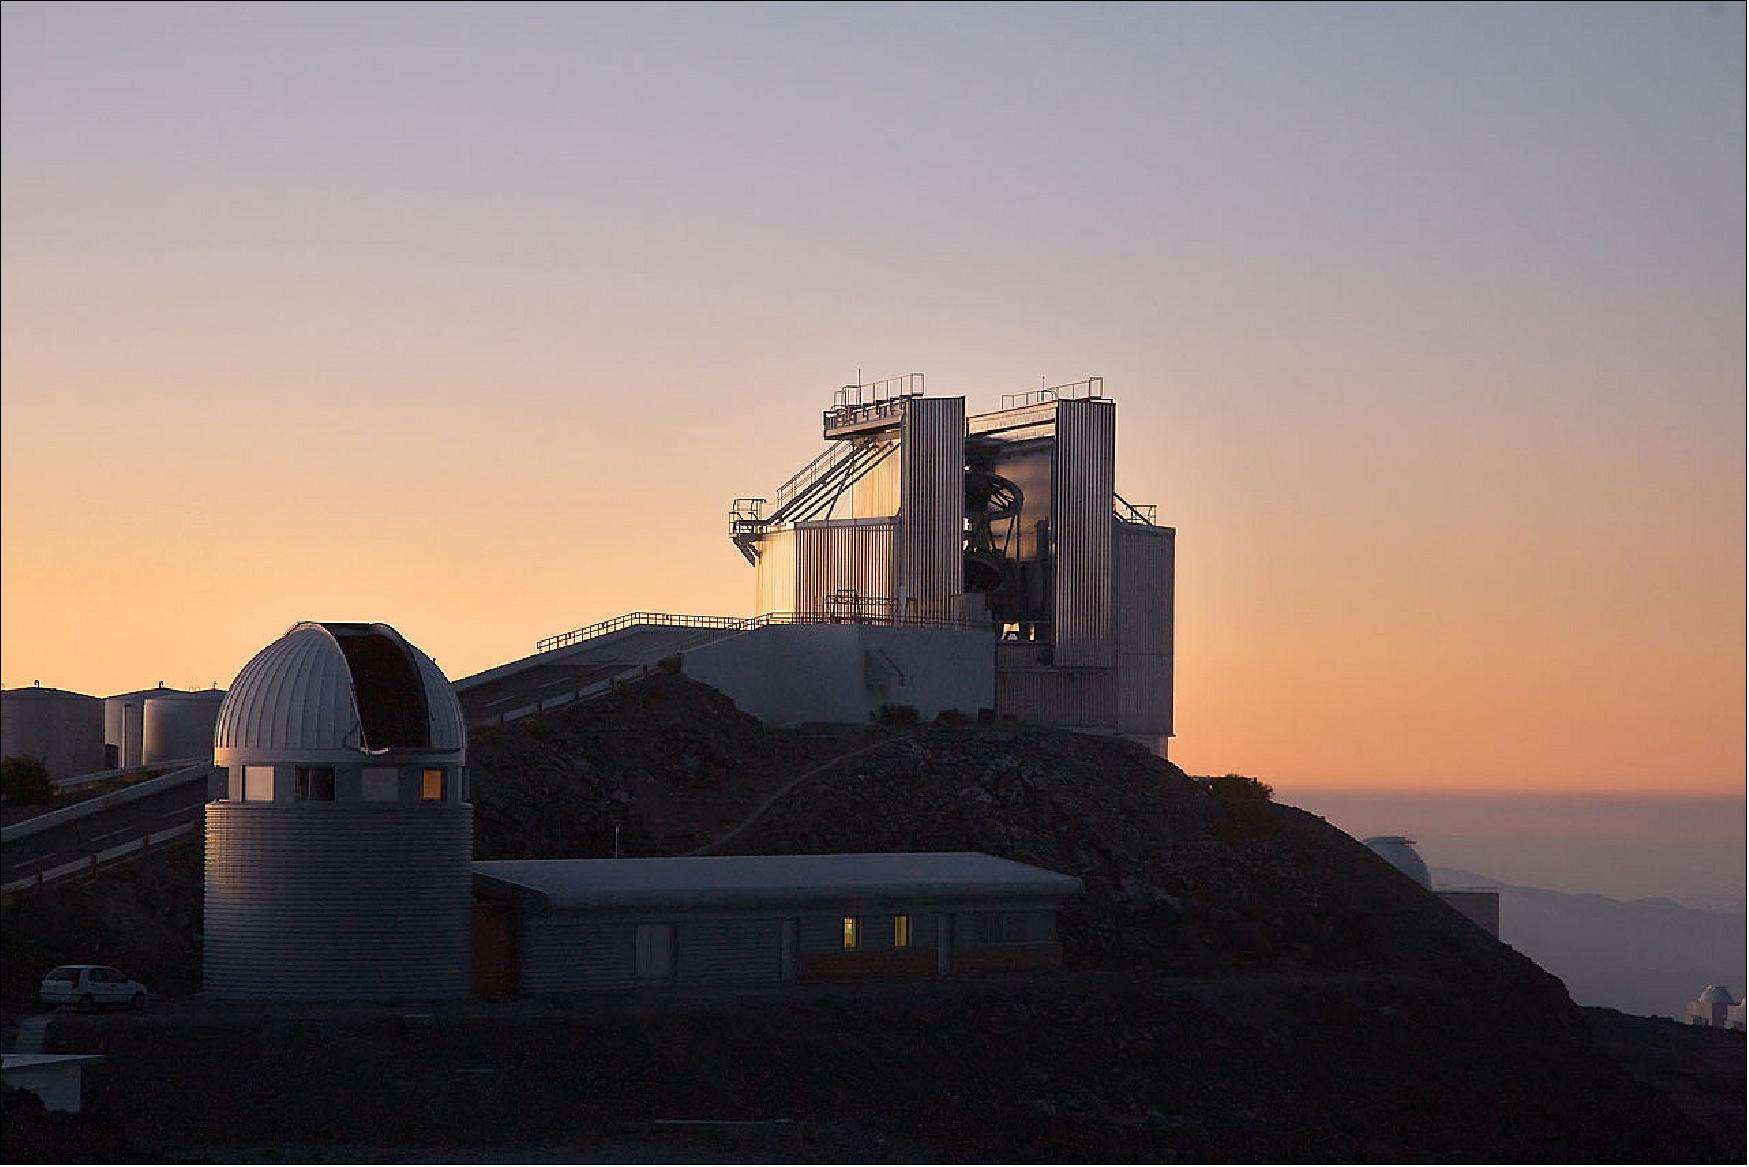 Figure 7: The sun sets behind the New Technology Telescope (NTT) at ESO's La Silla observation site. La Silla, in the southern part of the Atacama desert of Chile, was ESO's first observation site. Home to ESO 3.6-meter telescope and the 3.58-meter New Technology Telescope (NTT), the site sits 2400 m above sea level, creating excellent viewing conditions for astronomers. La Silla also hosts many national telescopes, including the Swiss 1.2-meter Leonhard Euler Telescope and the Danish 1.54-metere telescope (image credit: ESO, Iztok Boncina)